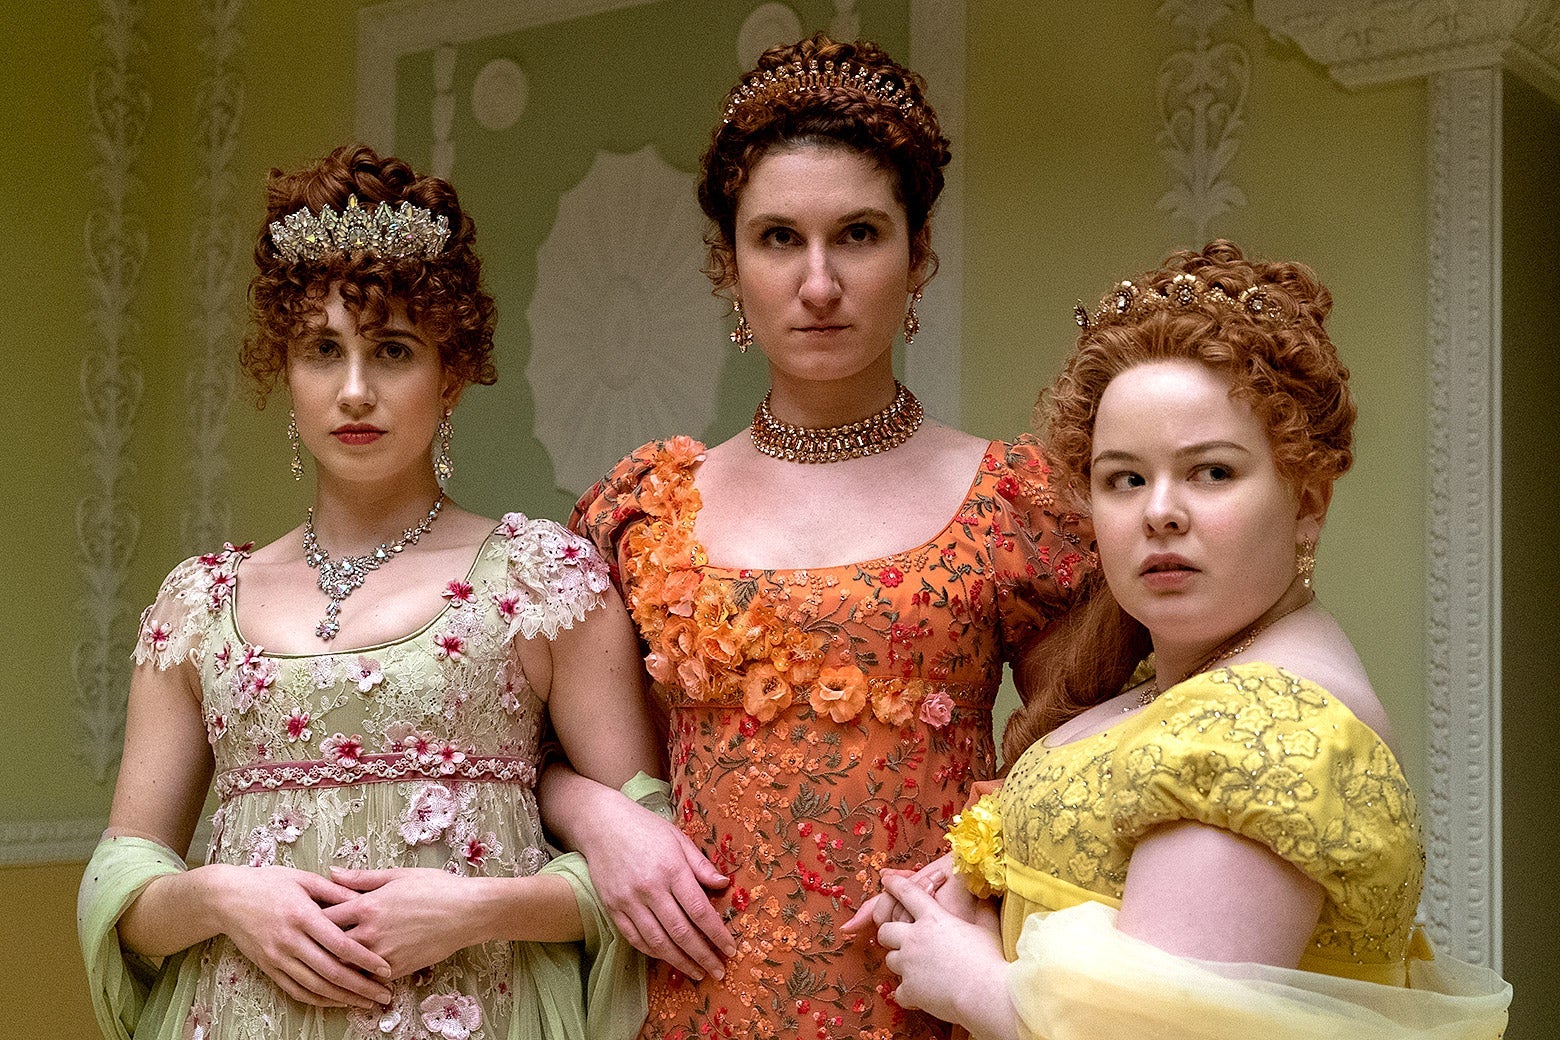 Harriet Cains, Bessie Carter, and Nicola Coughlan wear gowns covered in embroidered flowers and sport oversized, glittering necklaces, earrings, and tiaras. All three have red hair worn up with tight curls; a lock of Penelope's hair cascades down one shoulder.